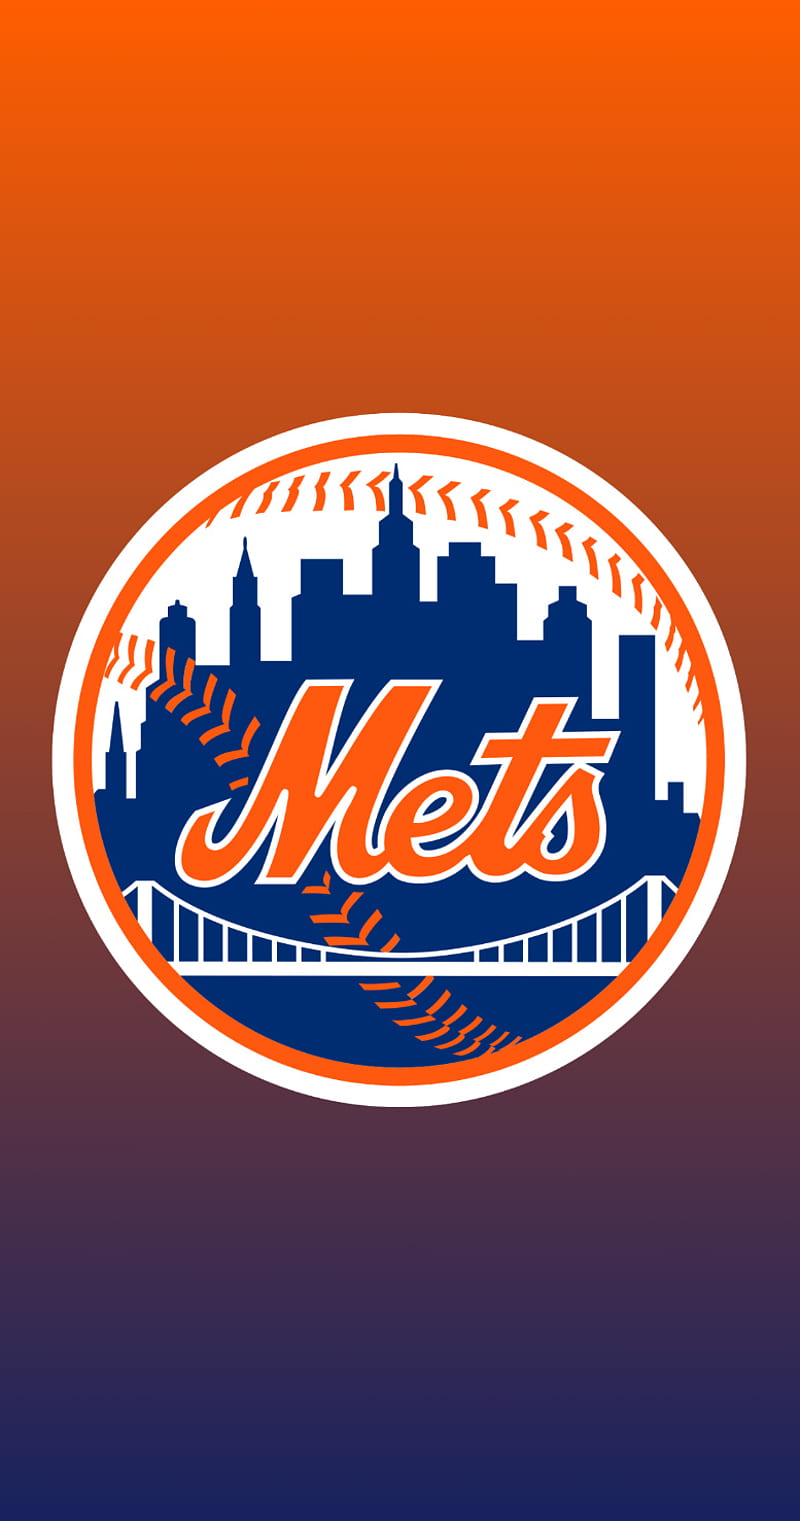 New York Mets on Twitter You need a wallpaper that reminds you to  VoteMets every day WallpaperWednesday Vote 5x a day   httpstco685VW7zKfl httpstcodMD3BP6oiu  Twitter